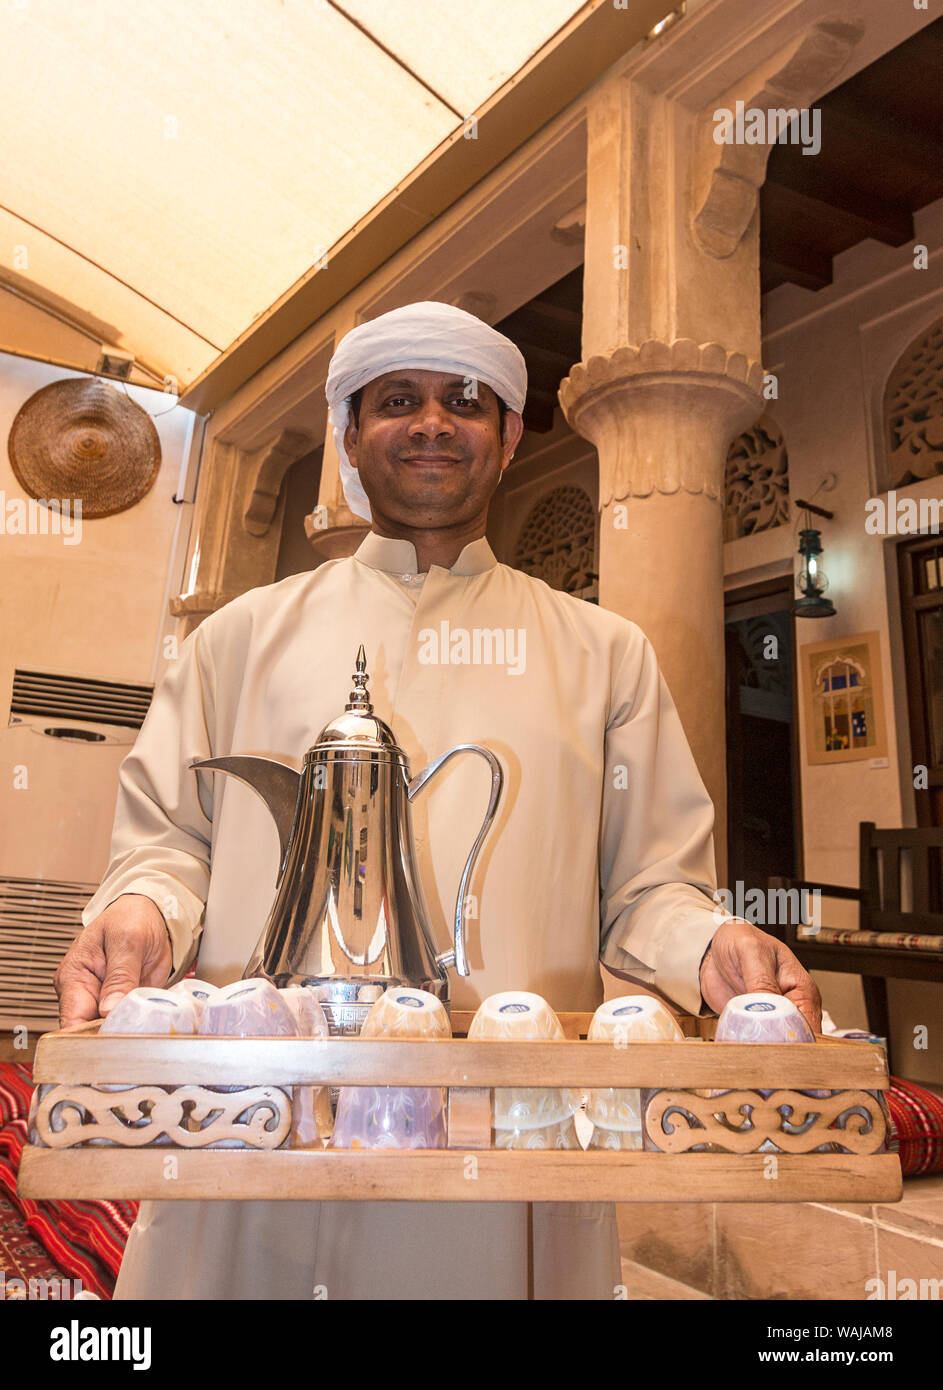 Dubai, UAE. Serving coffee at the Sheikh Mohammed Centre for Cultural Understanding. (MR, PR) Stock Photo